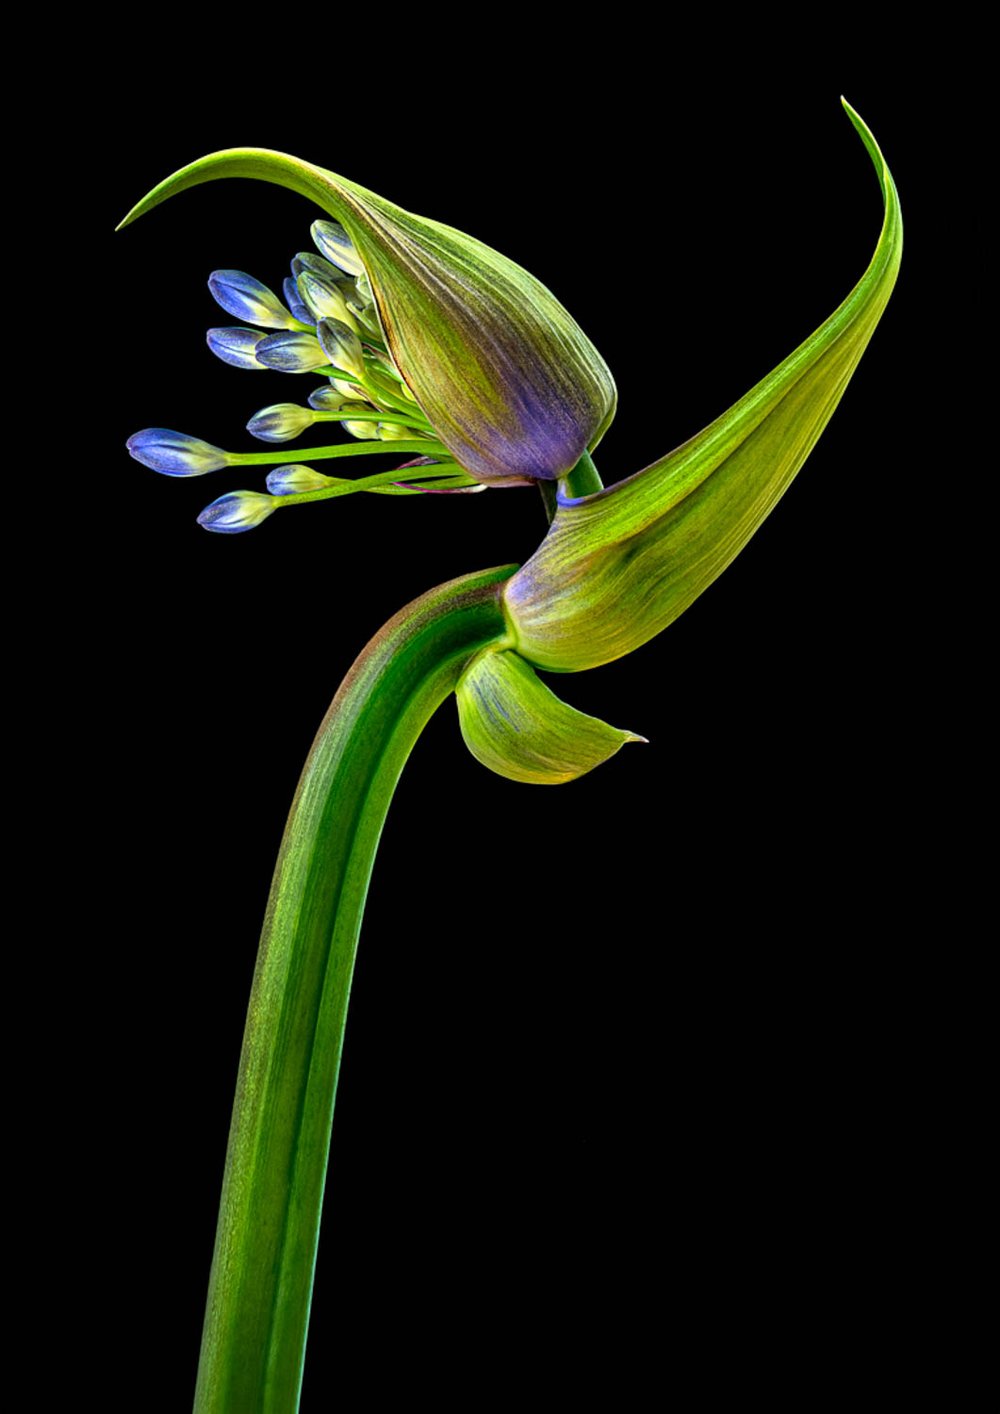 PRINT -  Set Subject:  Highly Commended  - Mario Mirabile,  The elegant weed